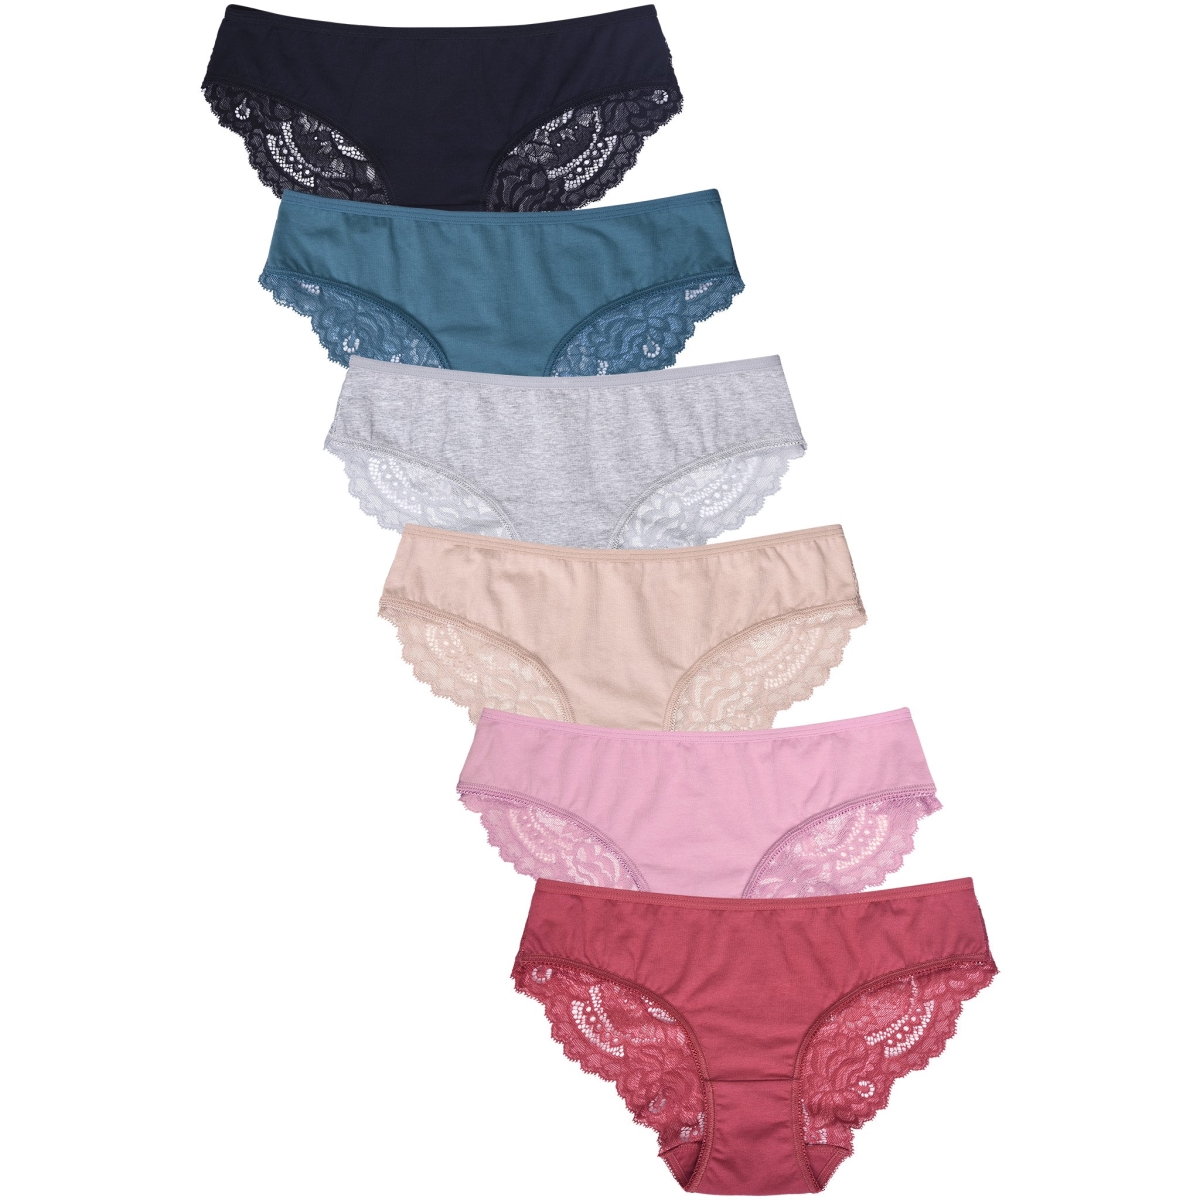 Picture of 247 Frenzy 247-LP1402CK2-XL Sofra Womens Essentials Cotton Stretch Bikini Panty Underwear - Assorted Color - Extra Large - Pack of 6